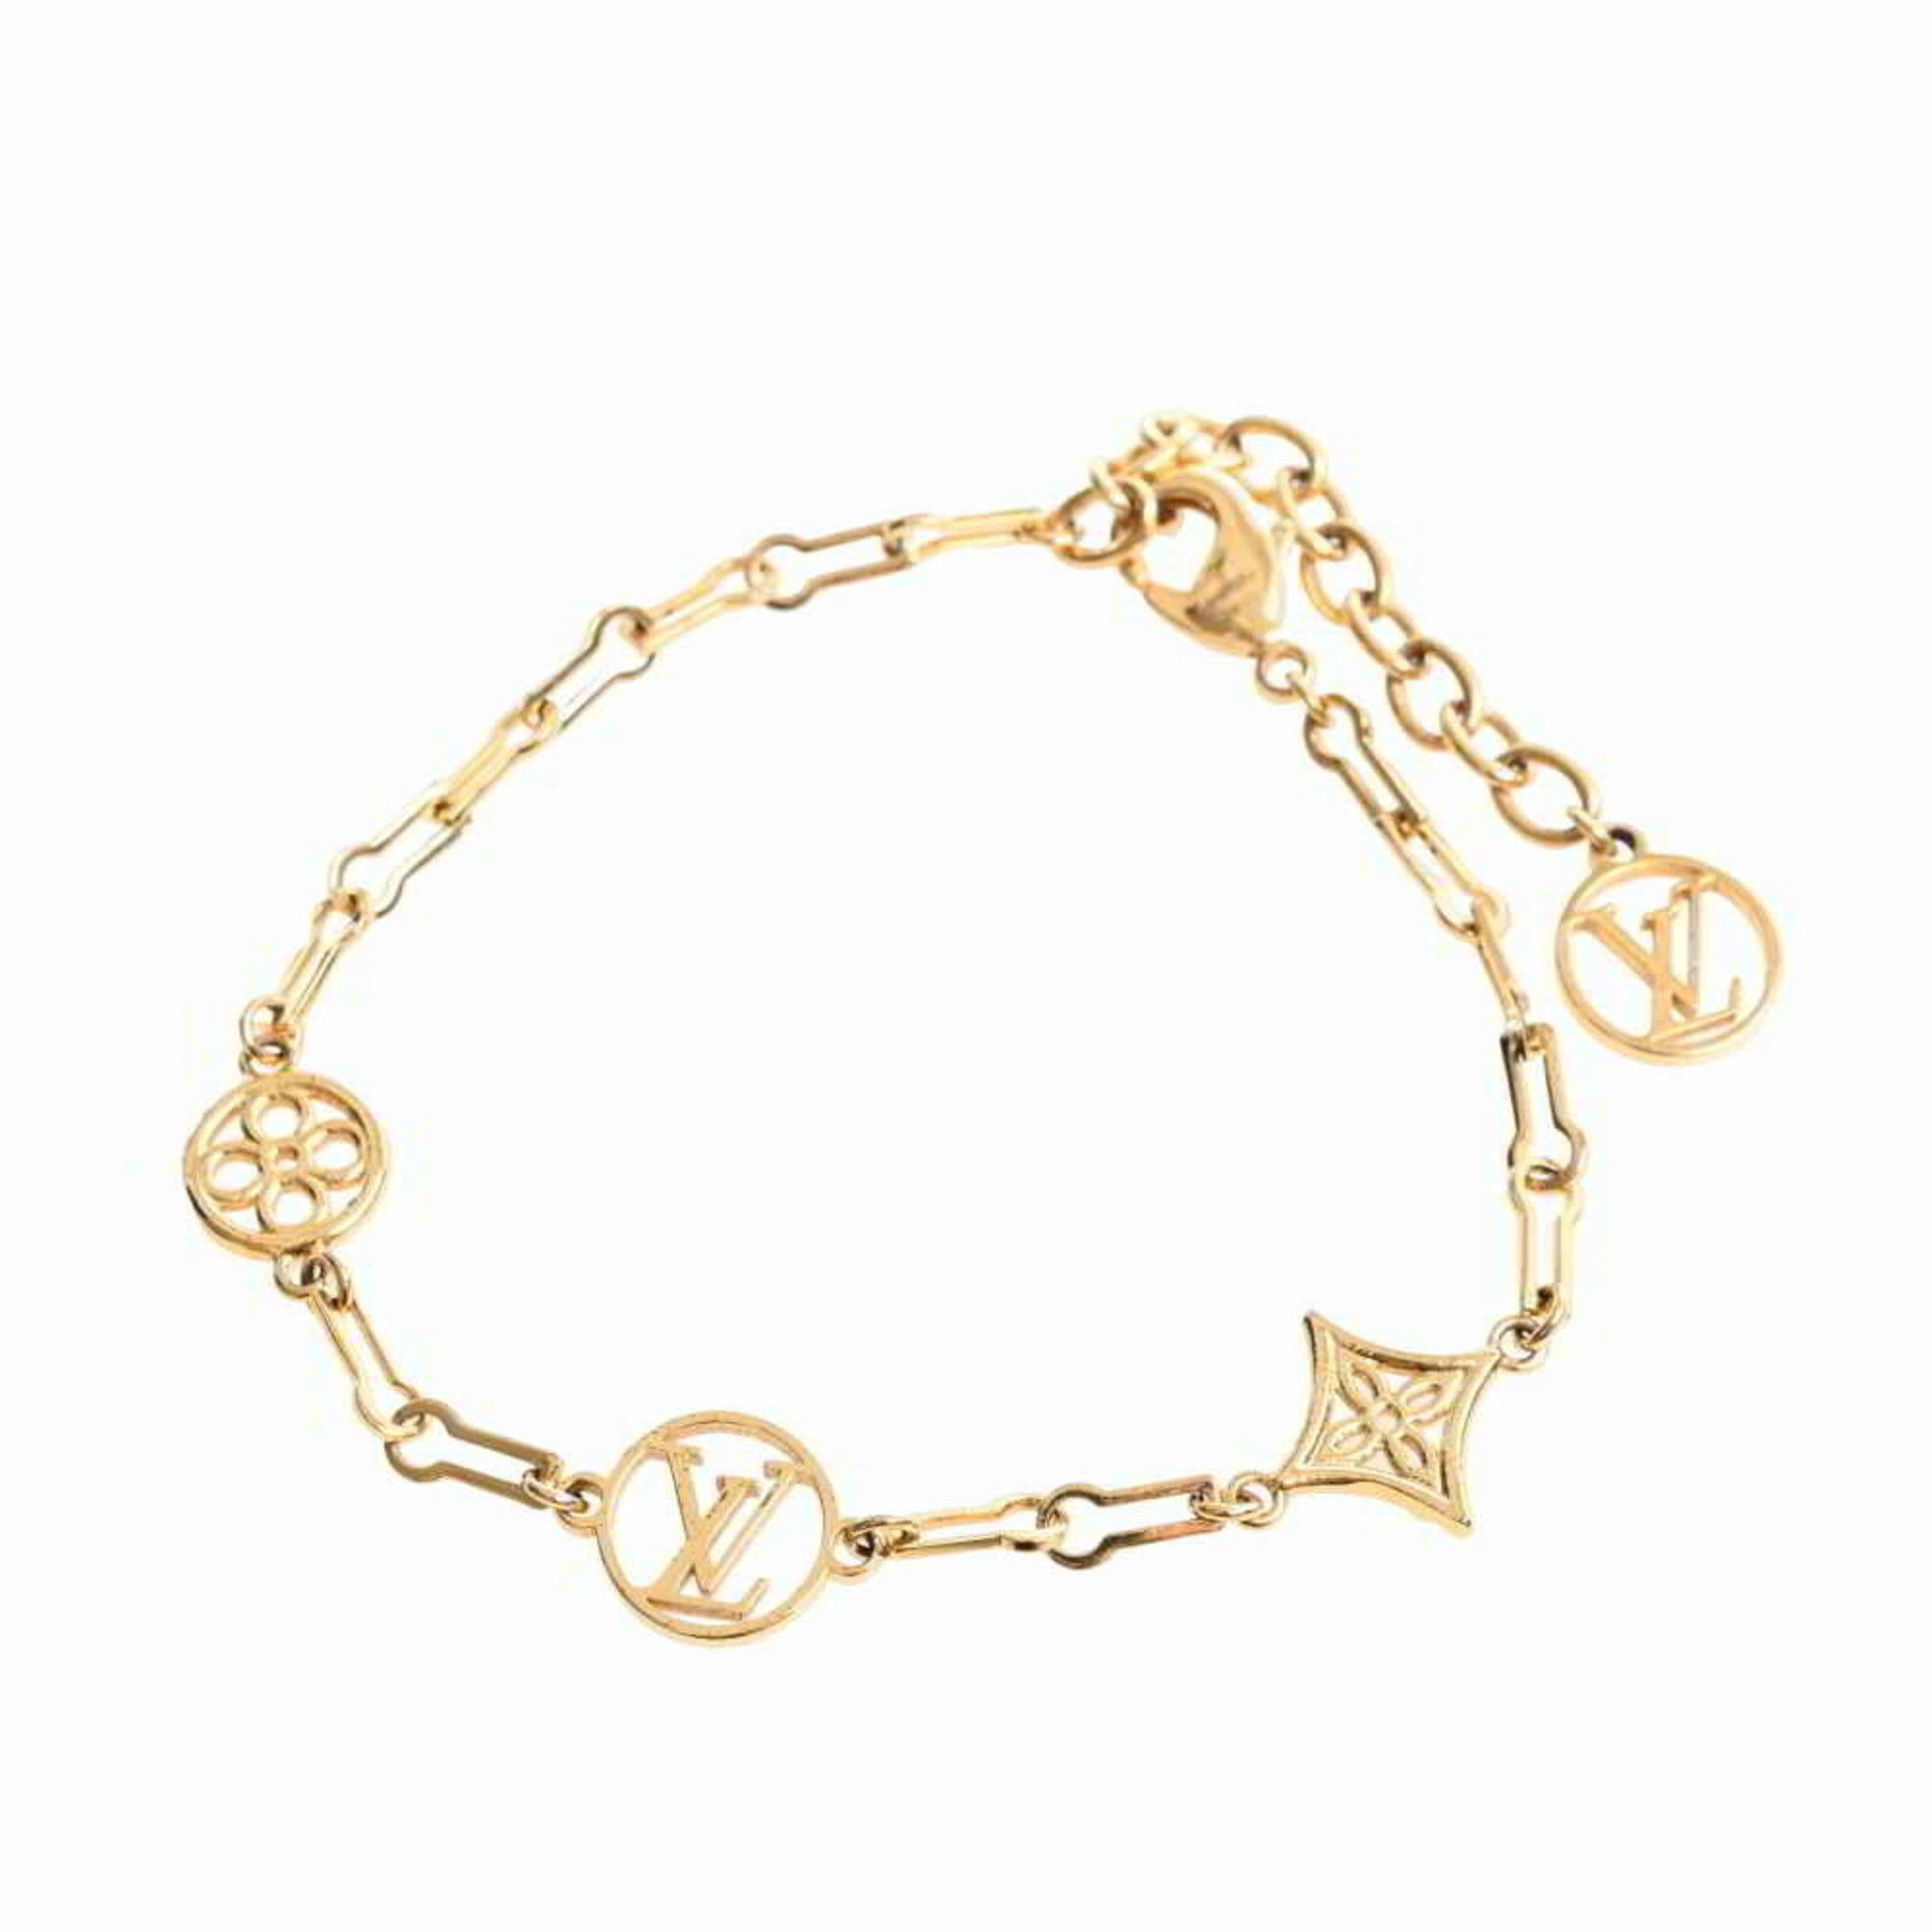  Louis Vuitton Bracelet M69584 Brass Forever Young Gold, Metal  : Clothing, Shoes & Jewelry